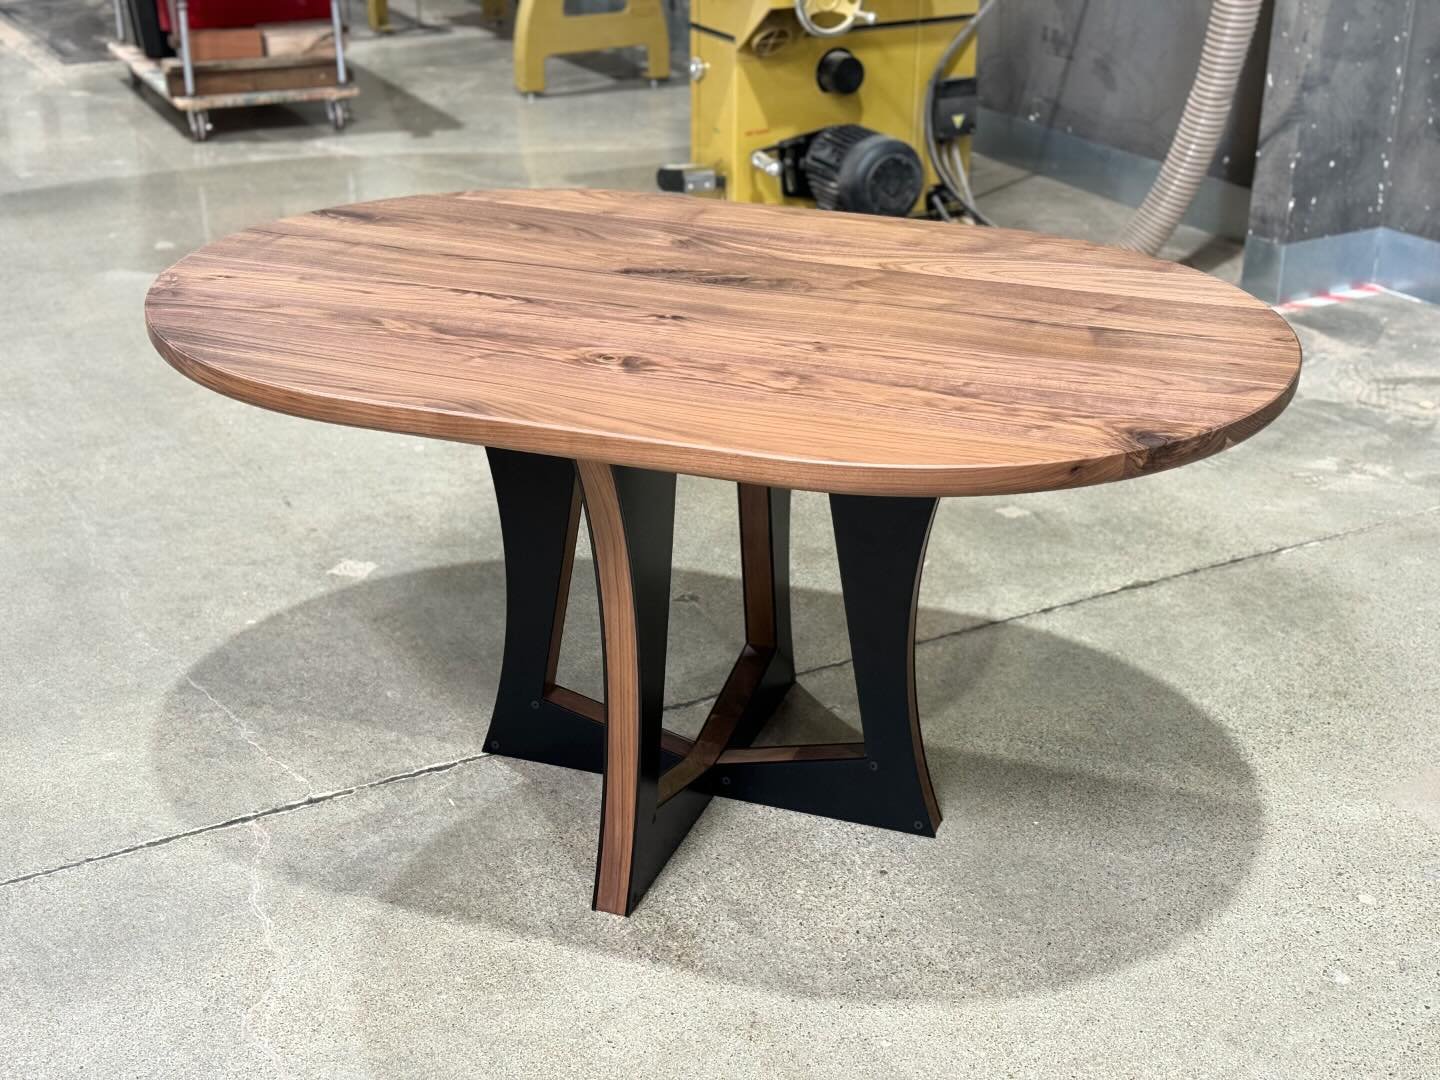 A small version of our &lsquo;Salerno&rsquo; dining table just shipped out.
Dimensions- 60x40&rdquo;
This table design featured a solid Walnut racetrack style tabletop. And custom base made using a combination of steel and walnut.
&mdash;&mdash;&mdas